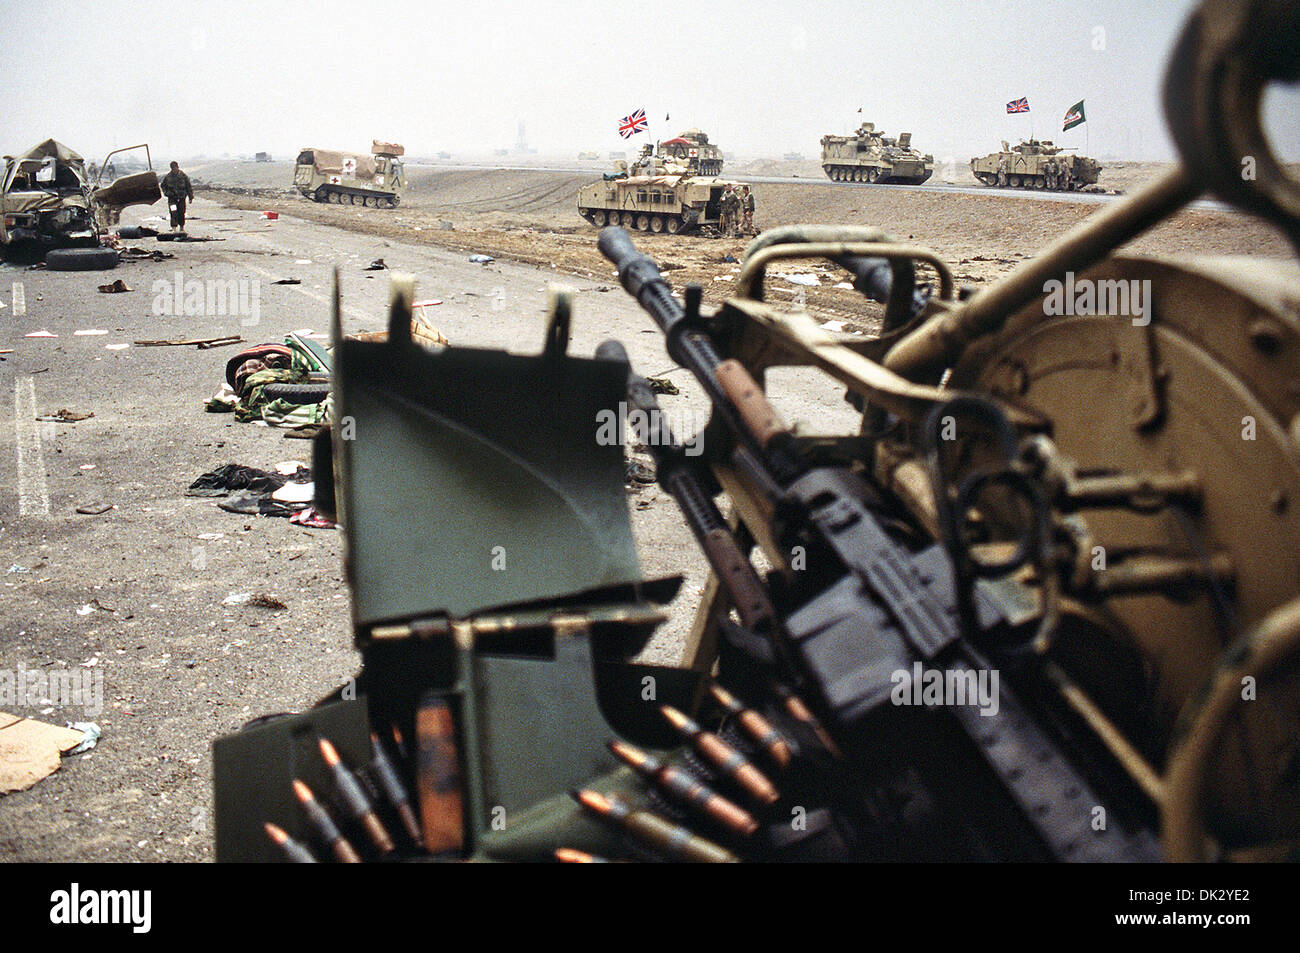 Destroyed vehicles along Kuwait Highway 8, the route fleeing Iraqi forces took as they retreated from Kuwait during Operation Desert Storm February 28, 1991 in Kuwait. The road is known as the 'highway of death' because of the number of vehicles destroyed by allied forces. Stock Photo